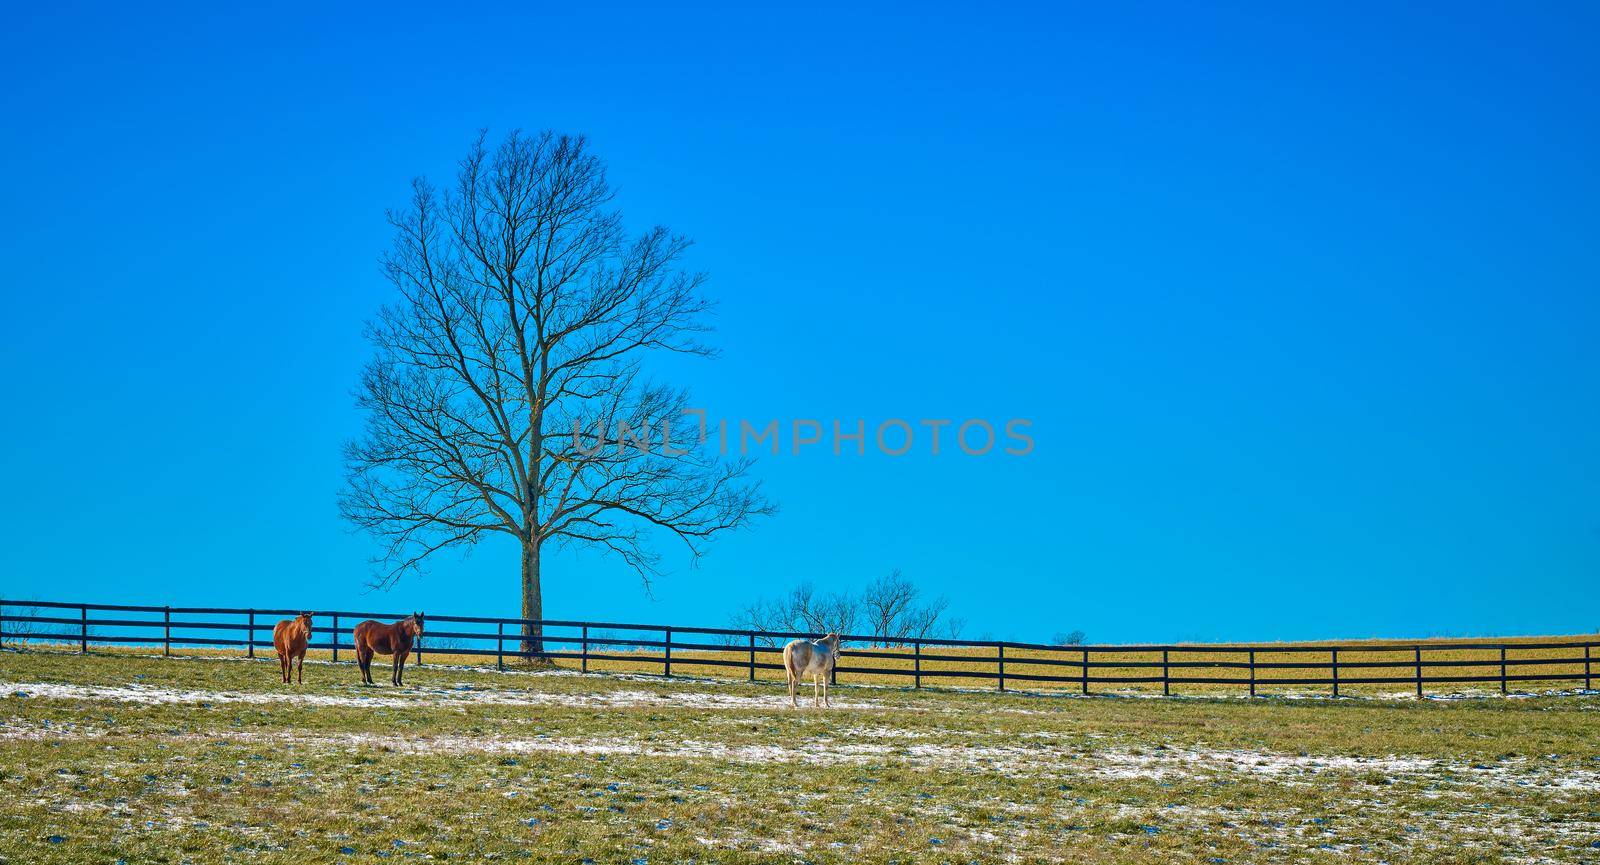 Three horses in a field by a tree against blue sky.